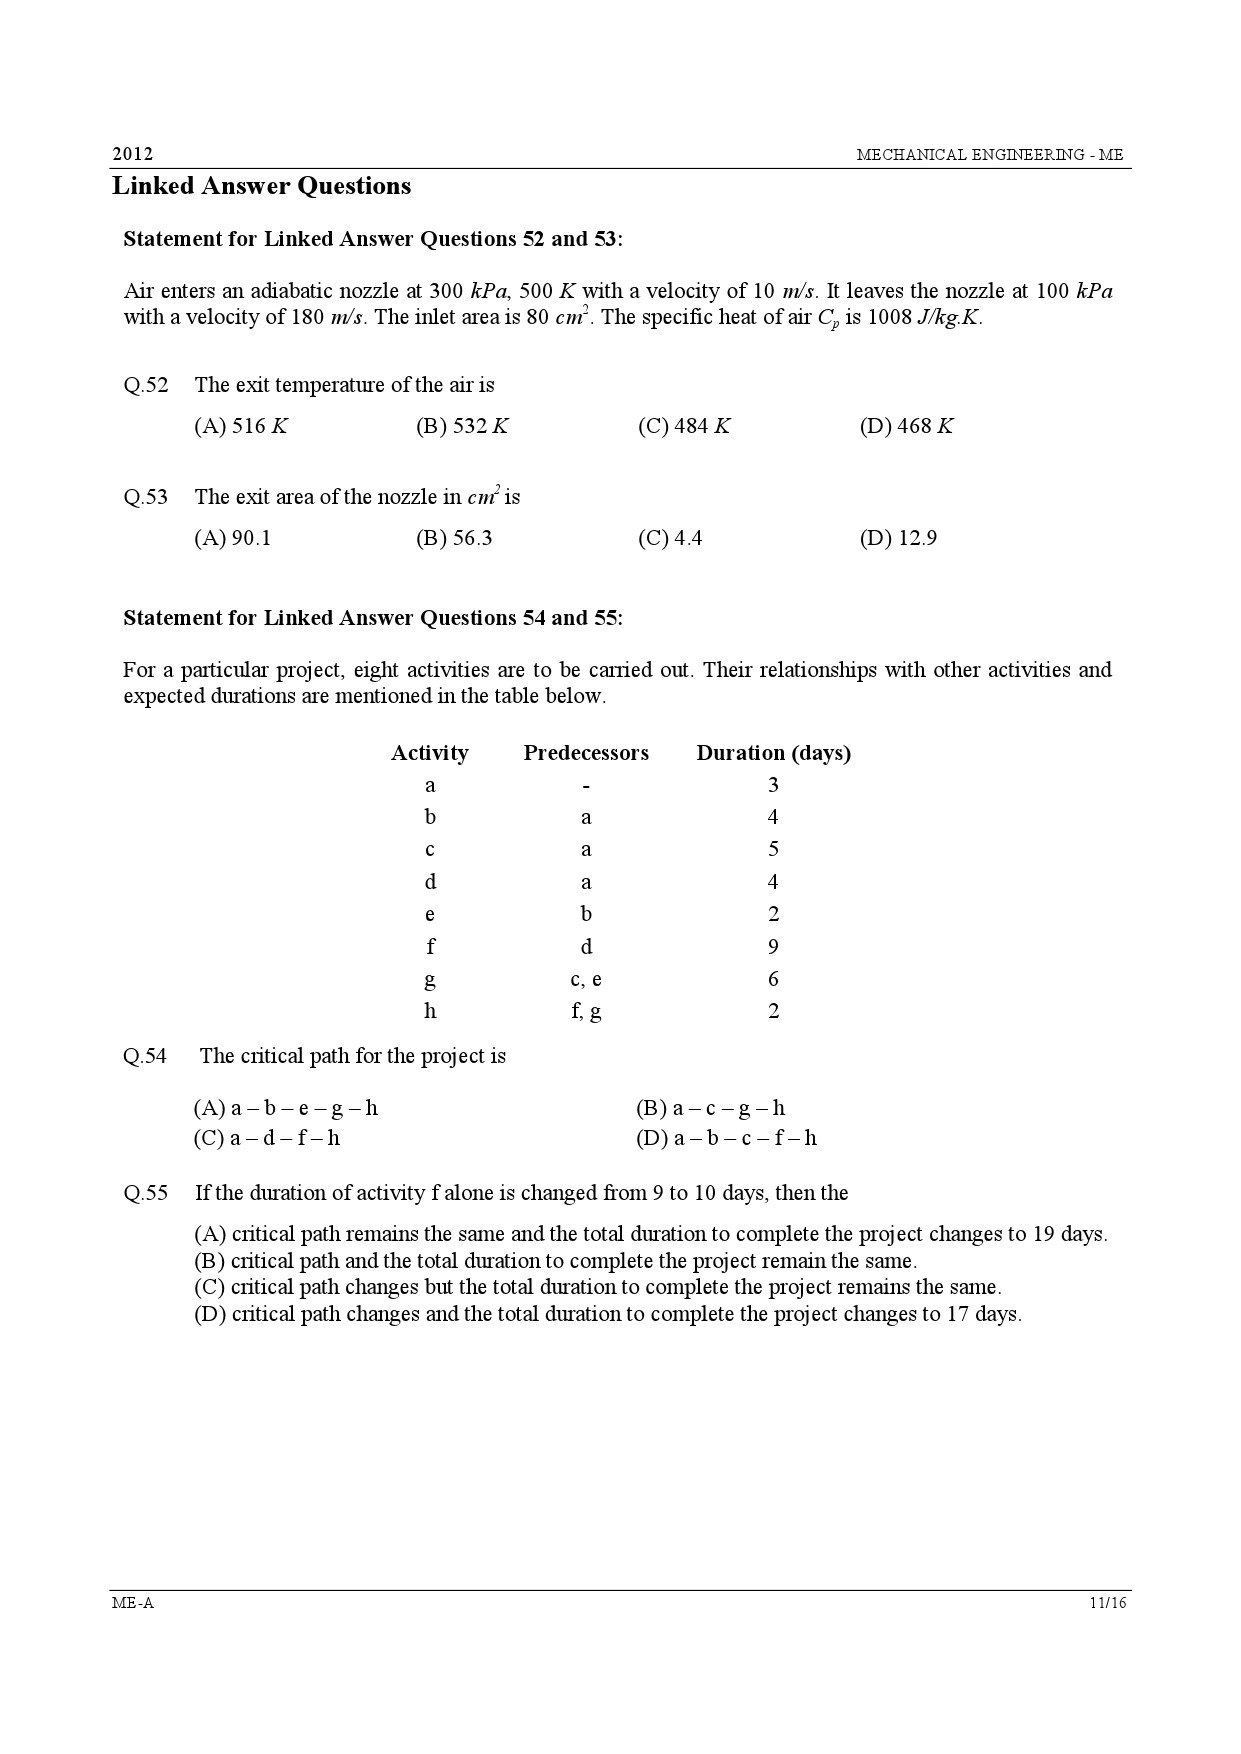 GATE Exam Question Paper 2012 Mechanical Engineering 11